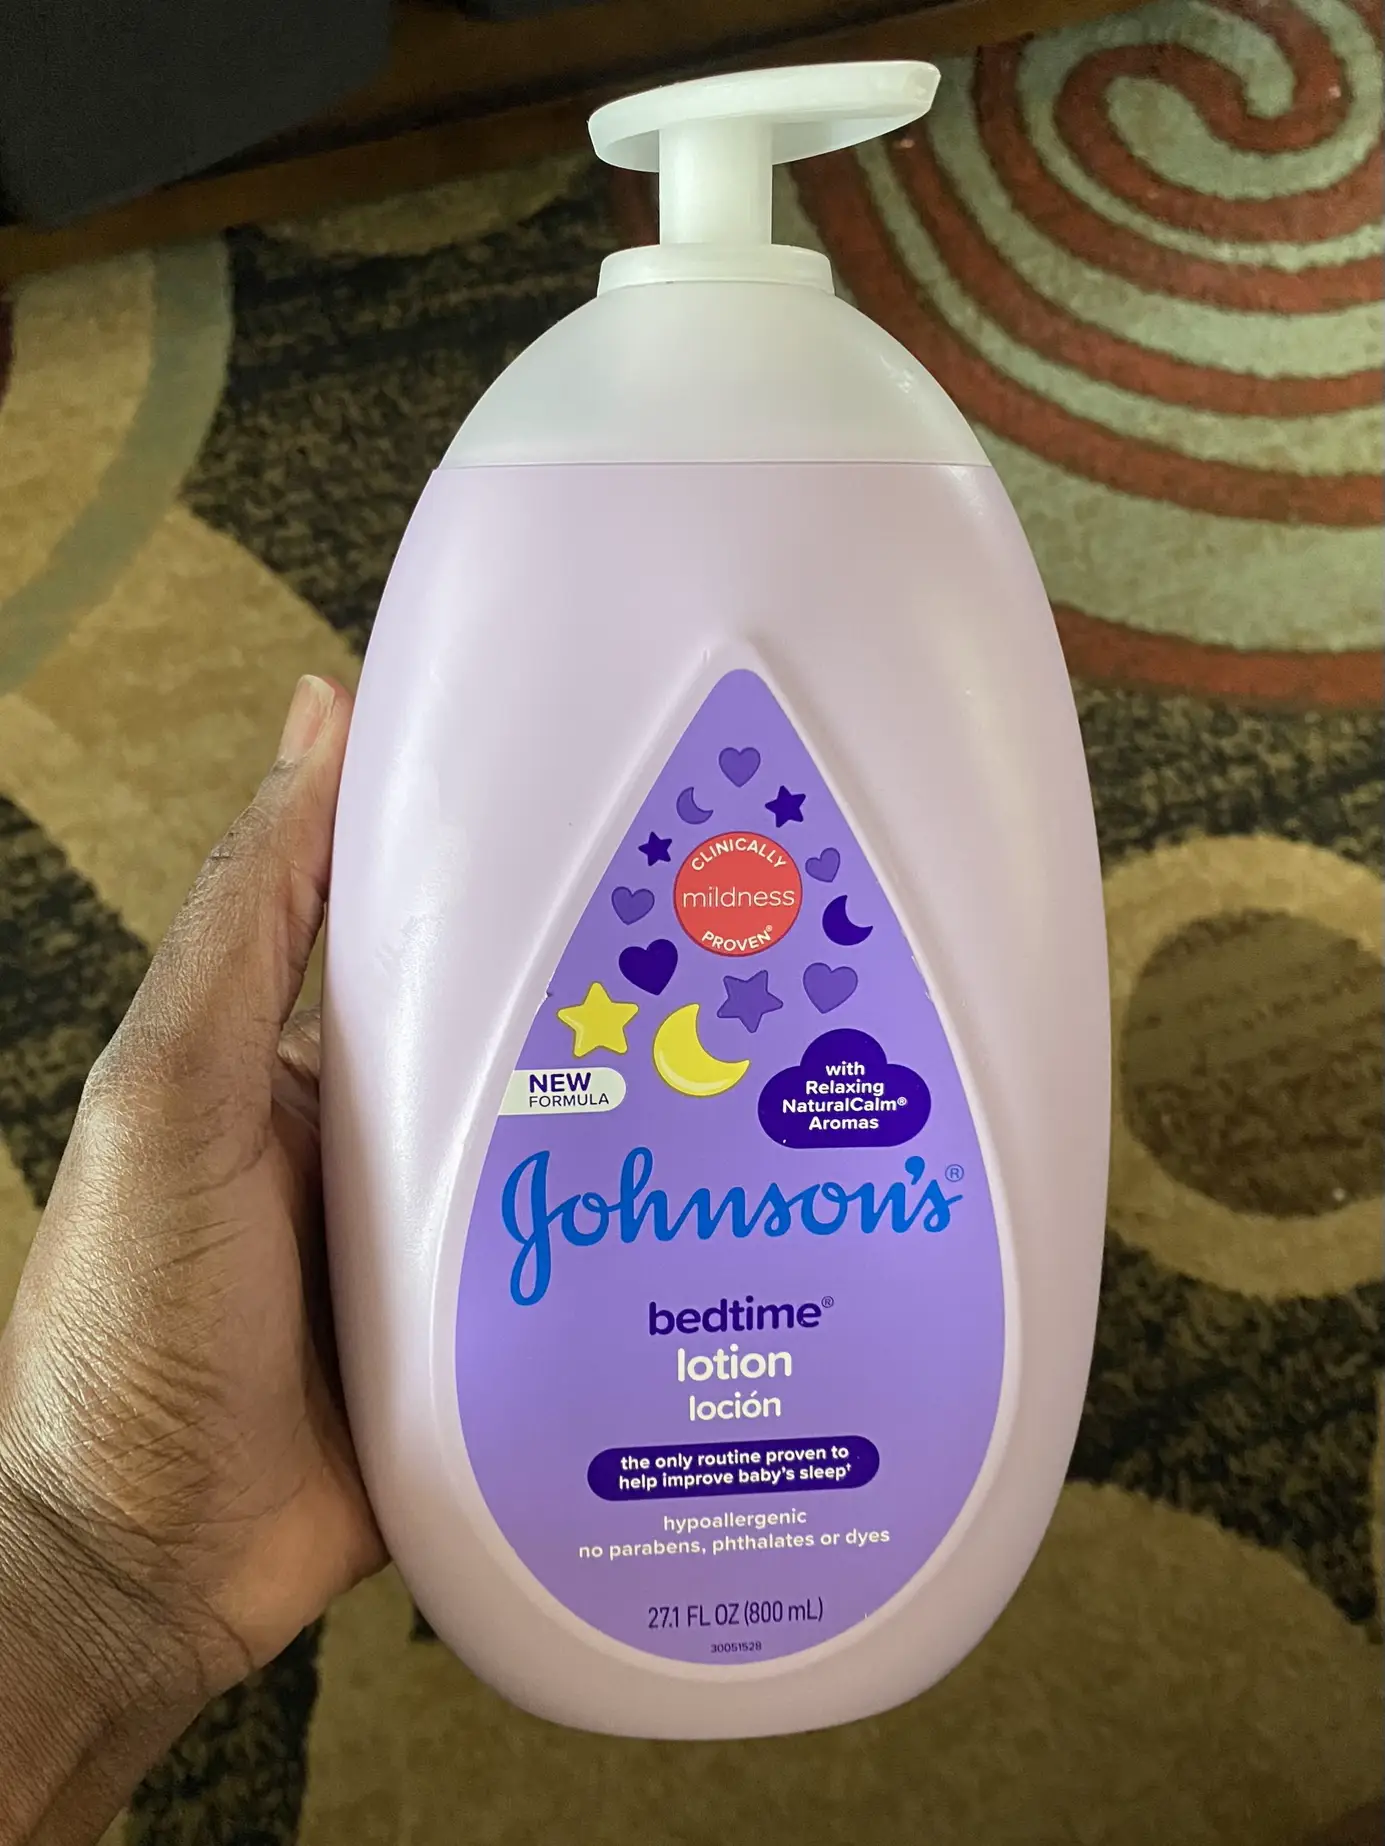 Johnson's Bedtime Baby Bath With Soothing Natural Calm Aromas,  Hypoallergenic - 13.6 Fl Oz : Target